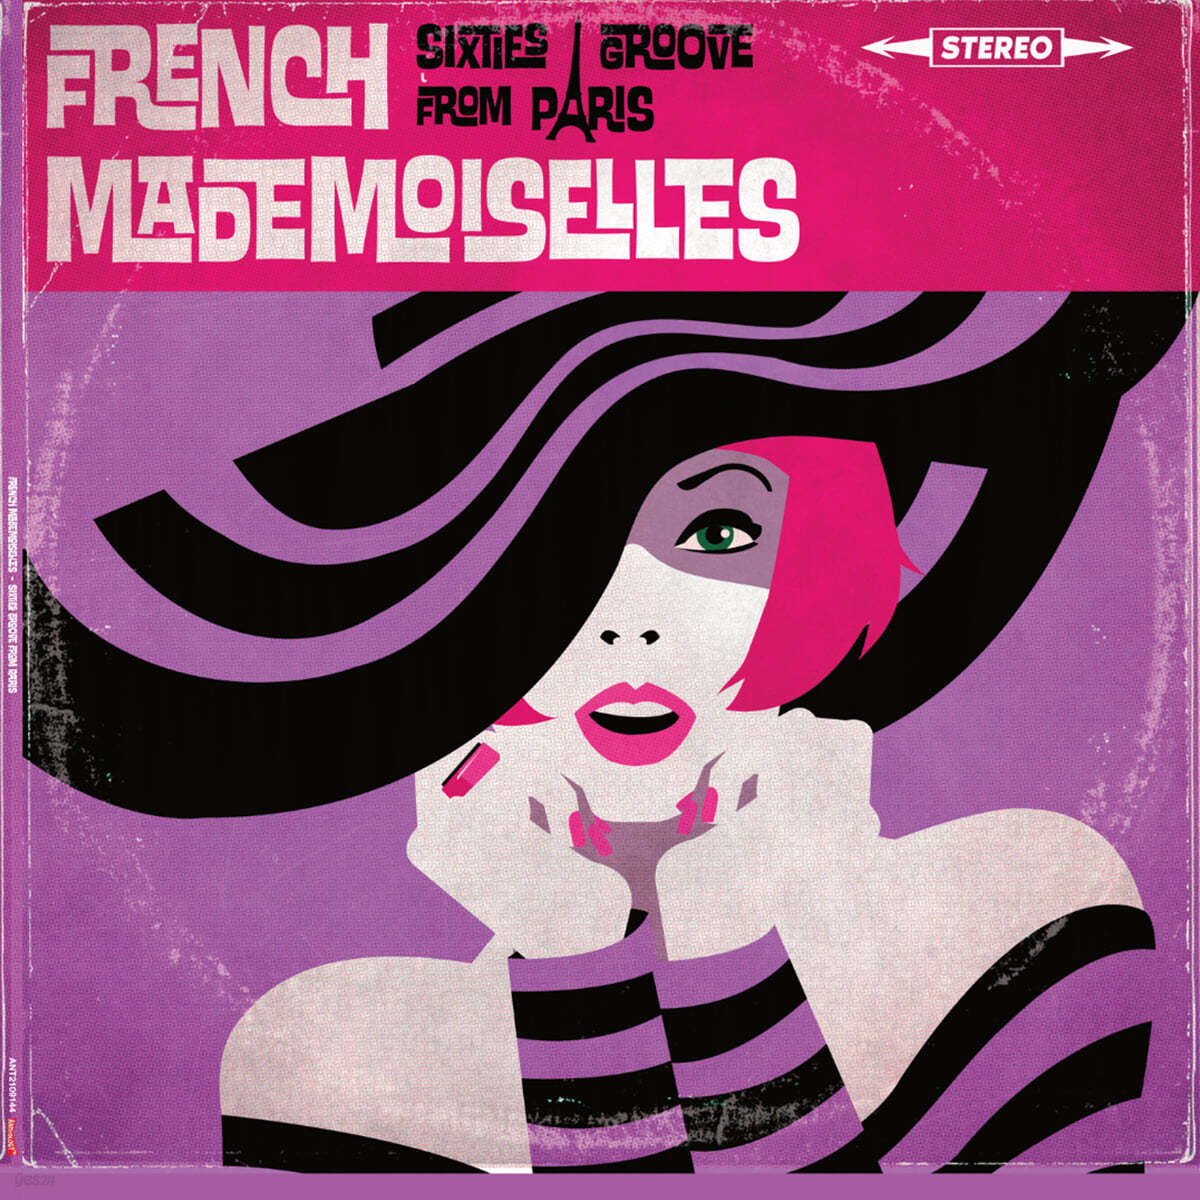 The French Mademoiselles (프렌치 마드모아젤스) - Sixties Groove From Paris